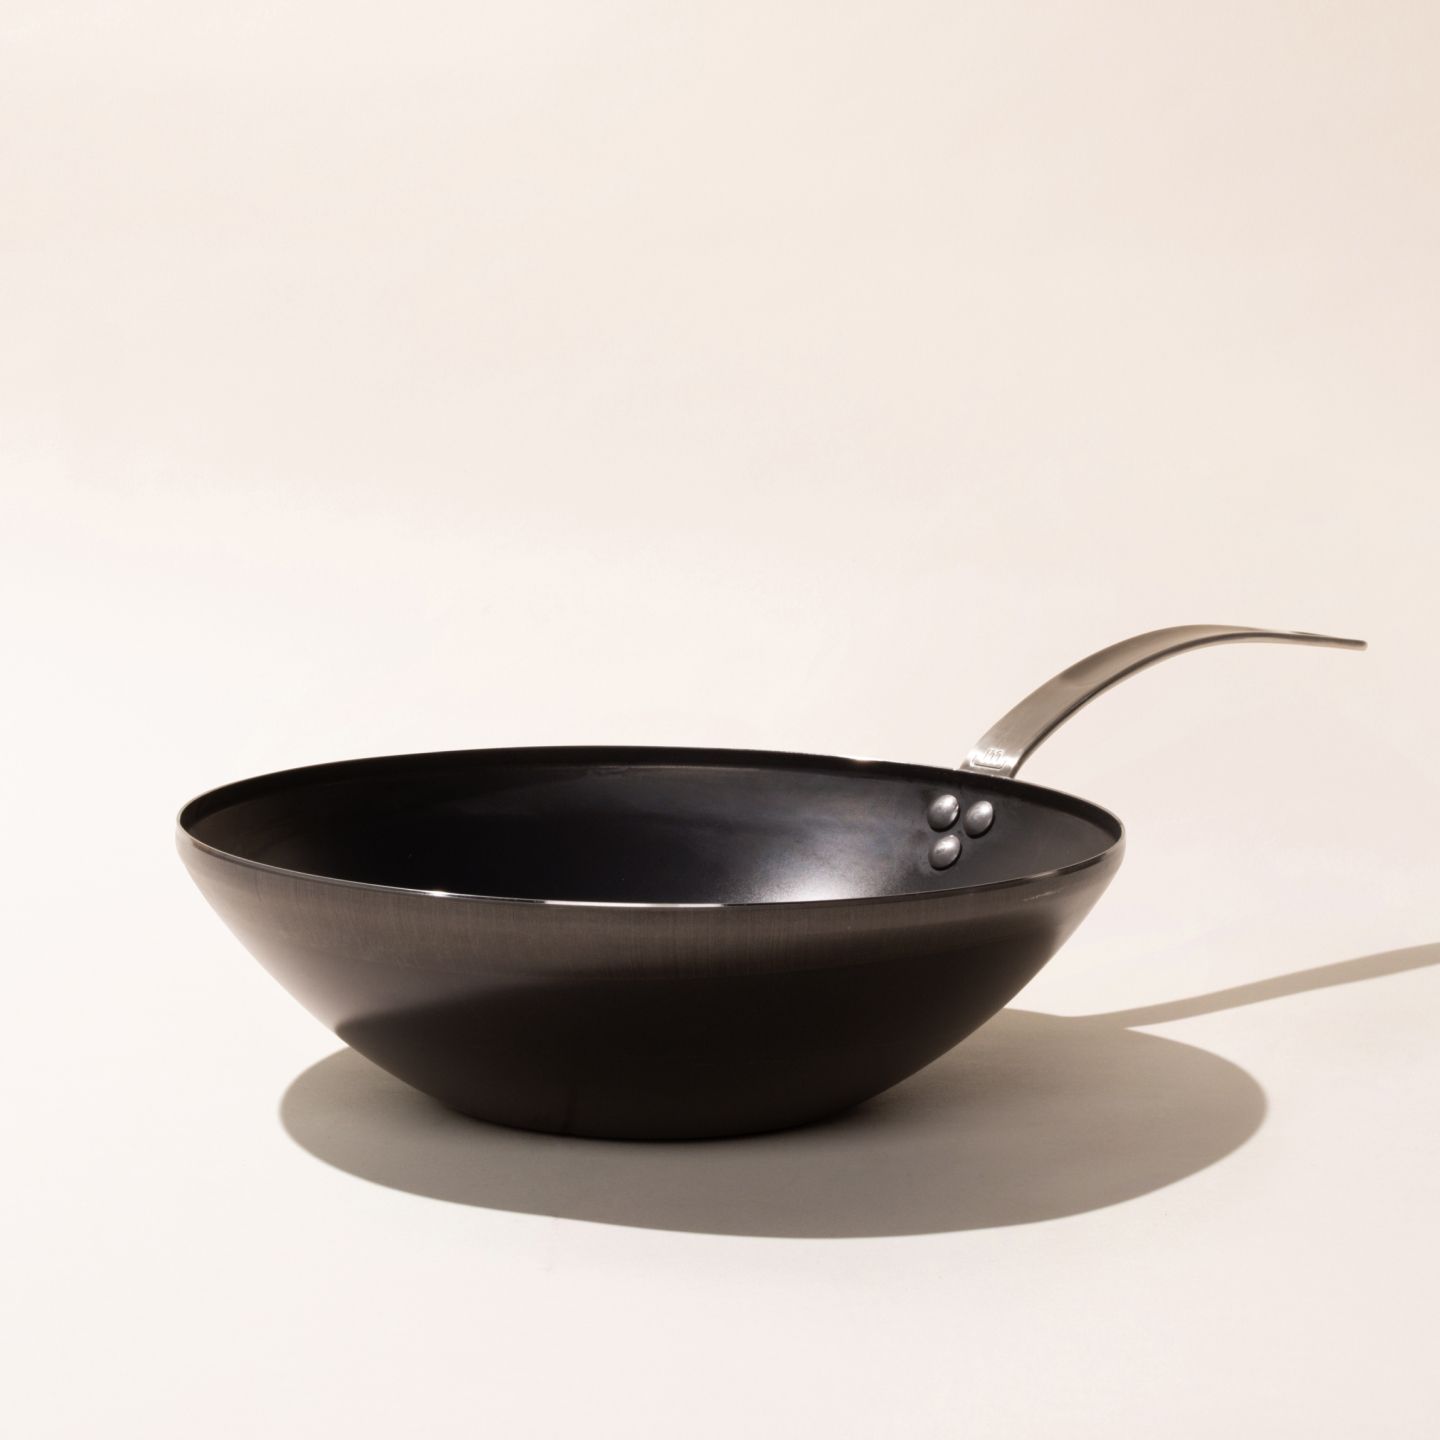 12 Carbon Steel Nonstick Wok - Made By Design 1 ct